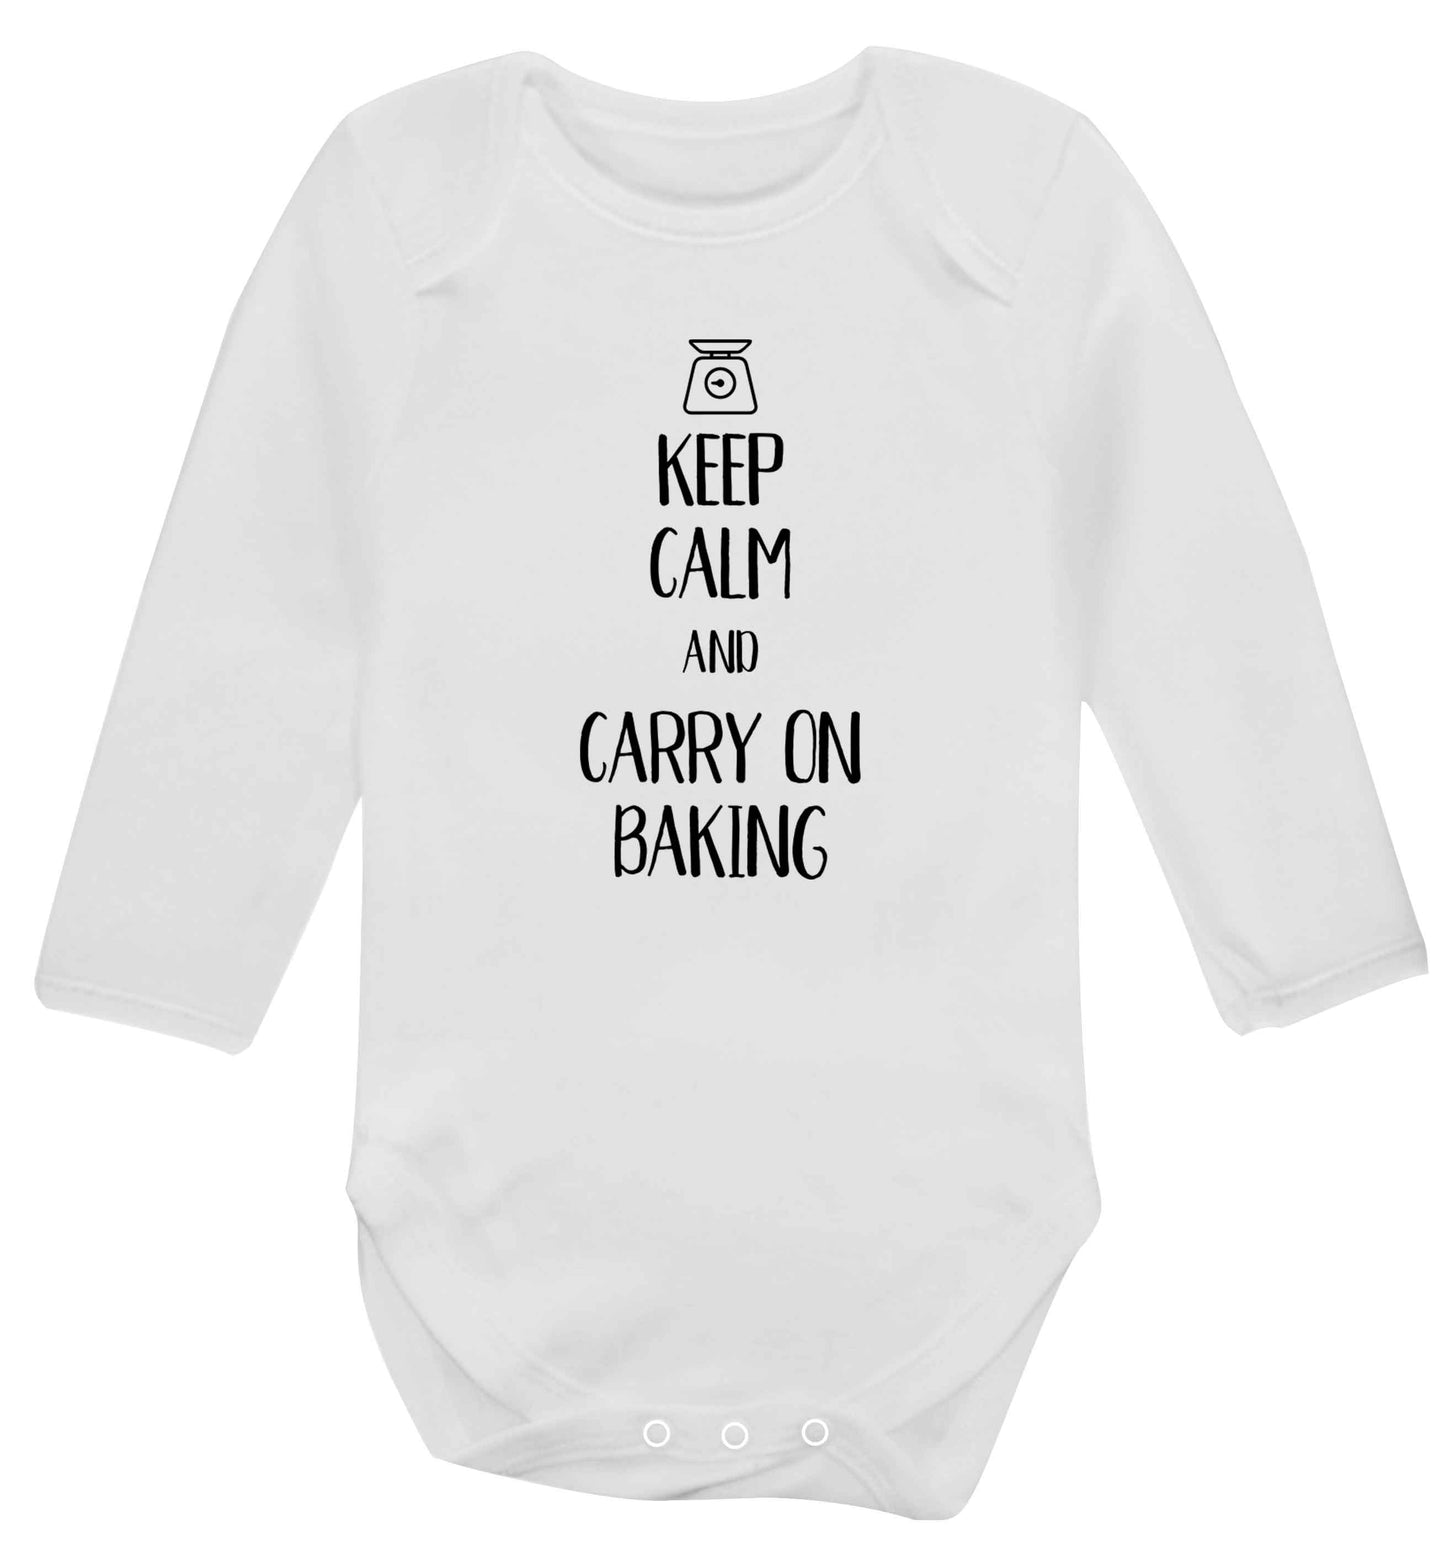 Keep calm and carry on baking Baby Vest long sleeved white 6-12 months